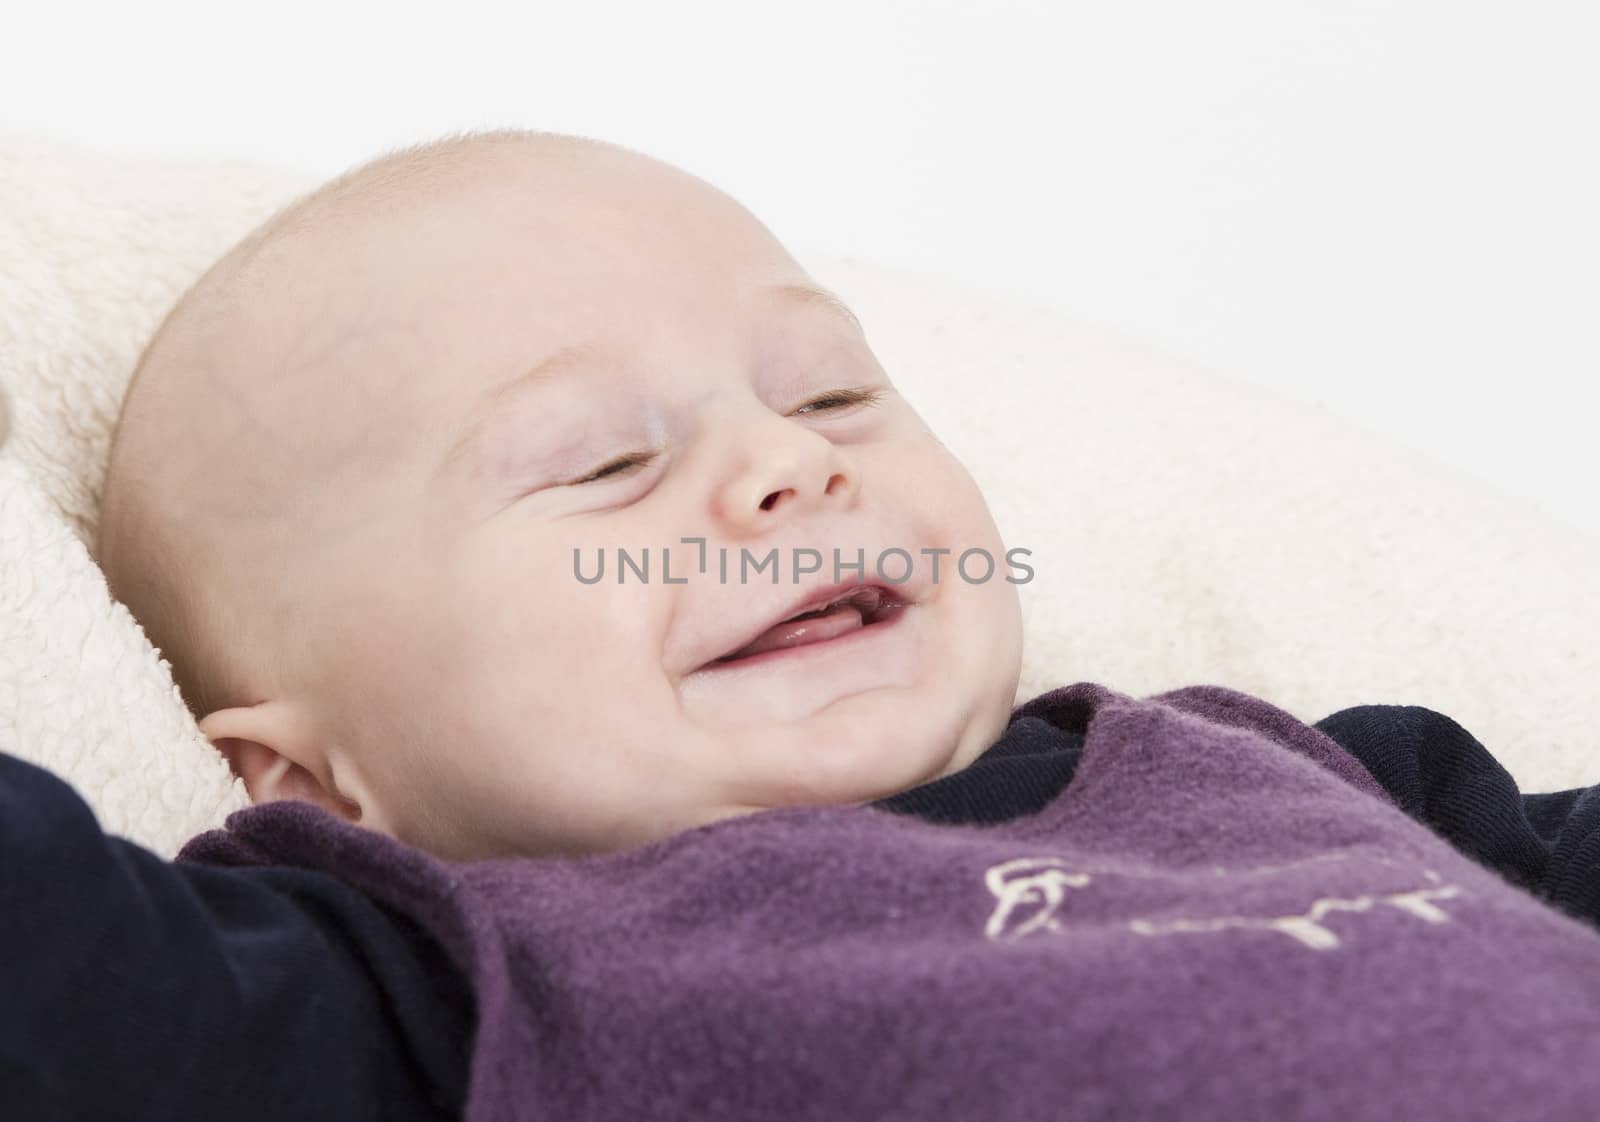 smiling young child in light background. horizontal image